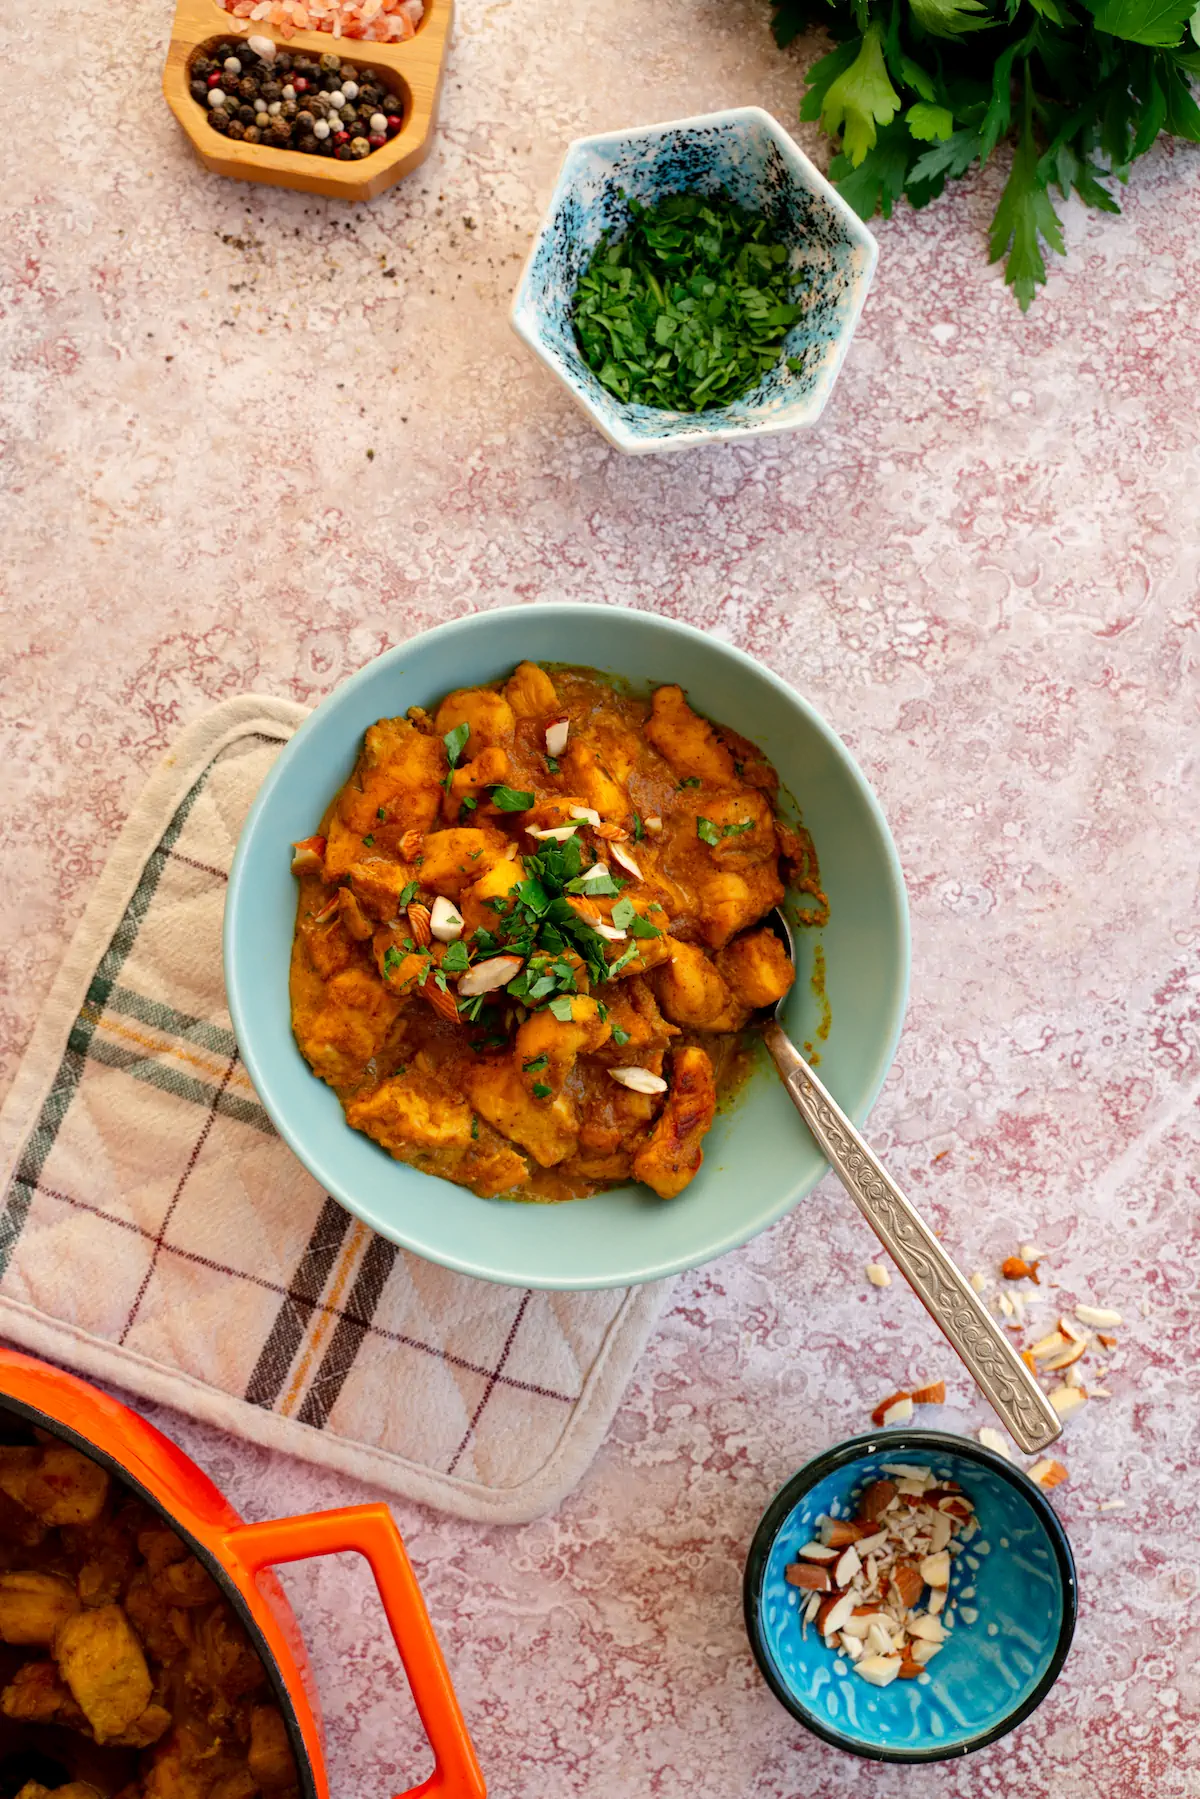 A bowl containing chicken korma, garnished with almonds and fresh herbs, and accompanied by a spoon.